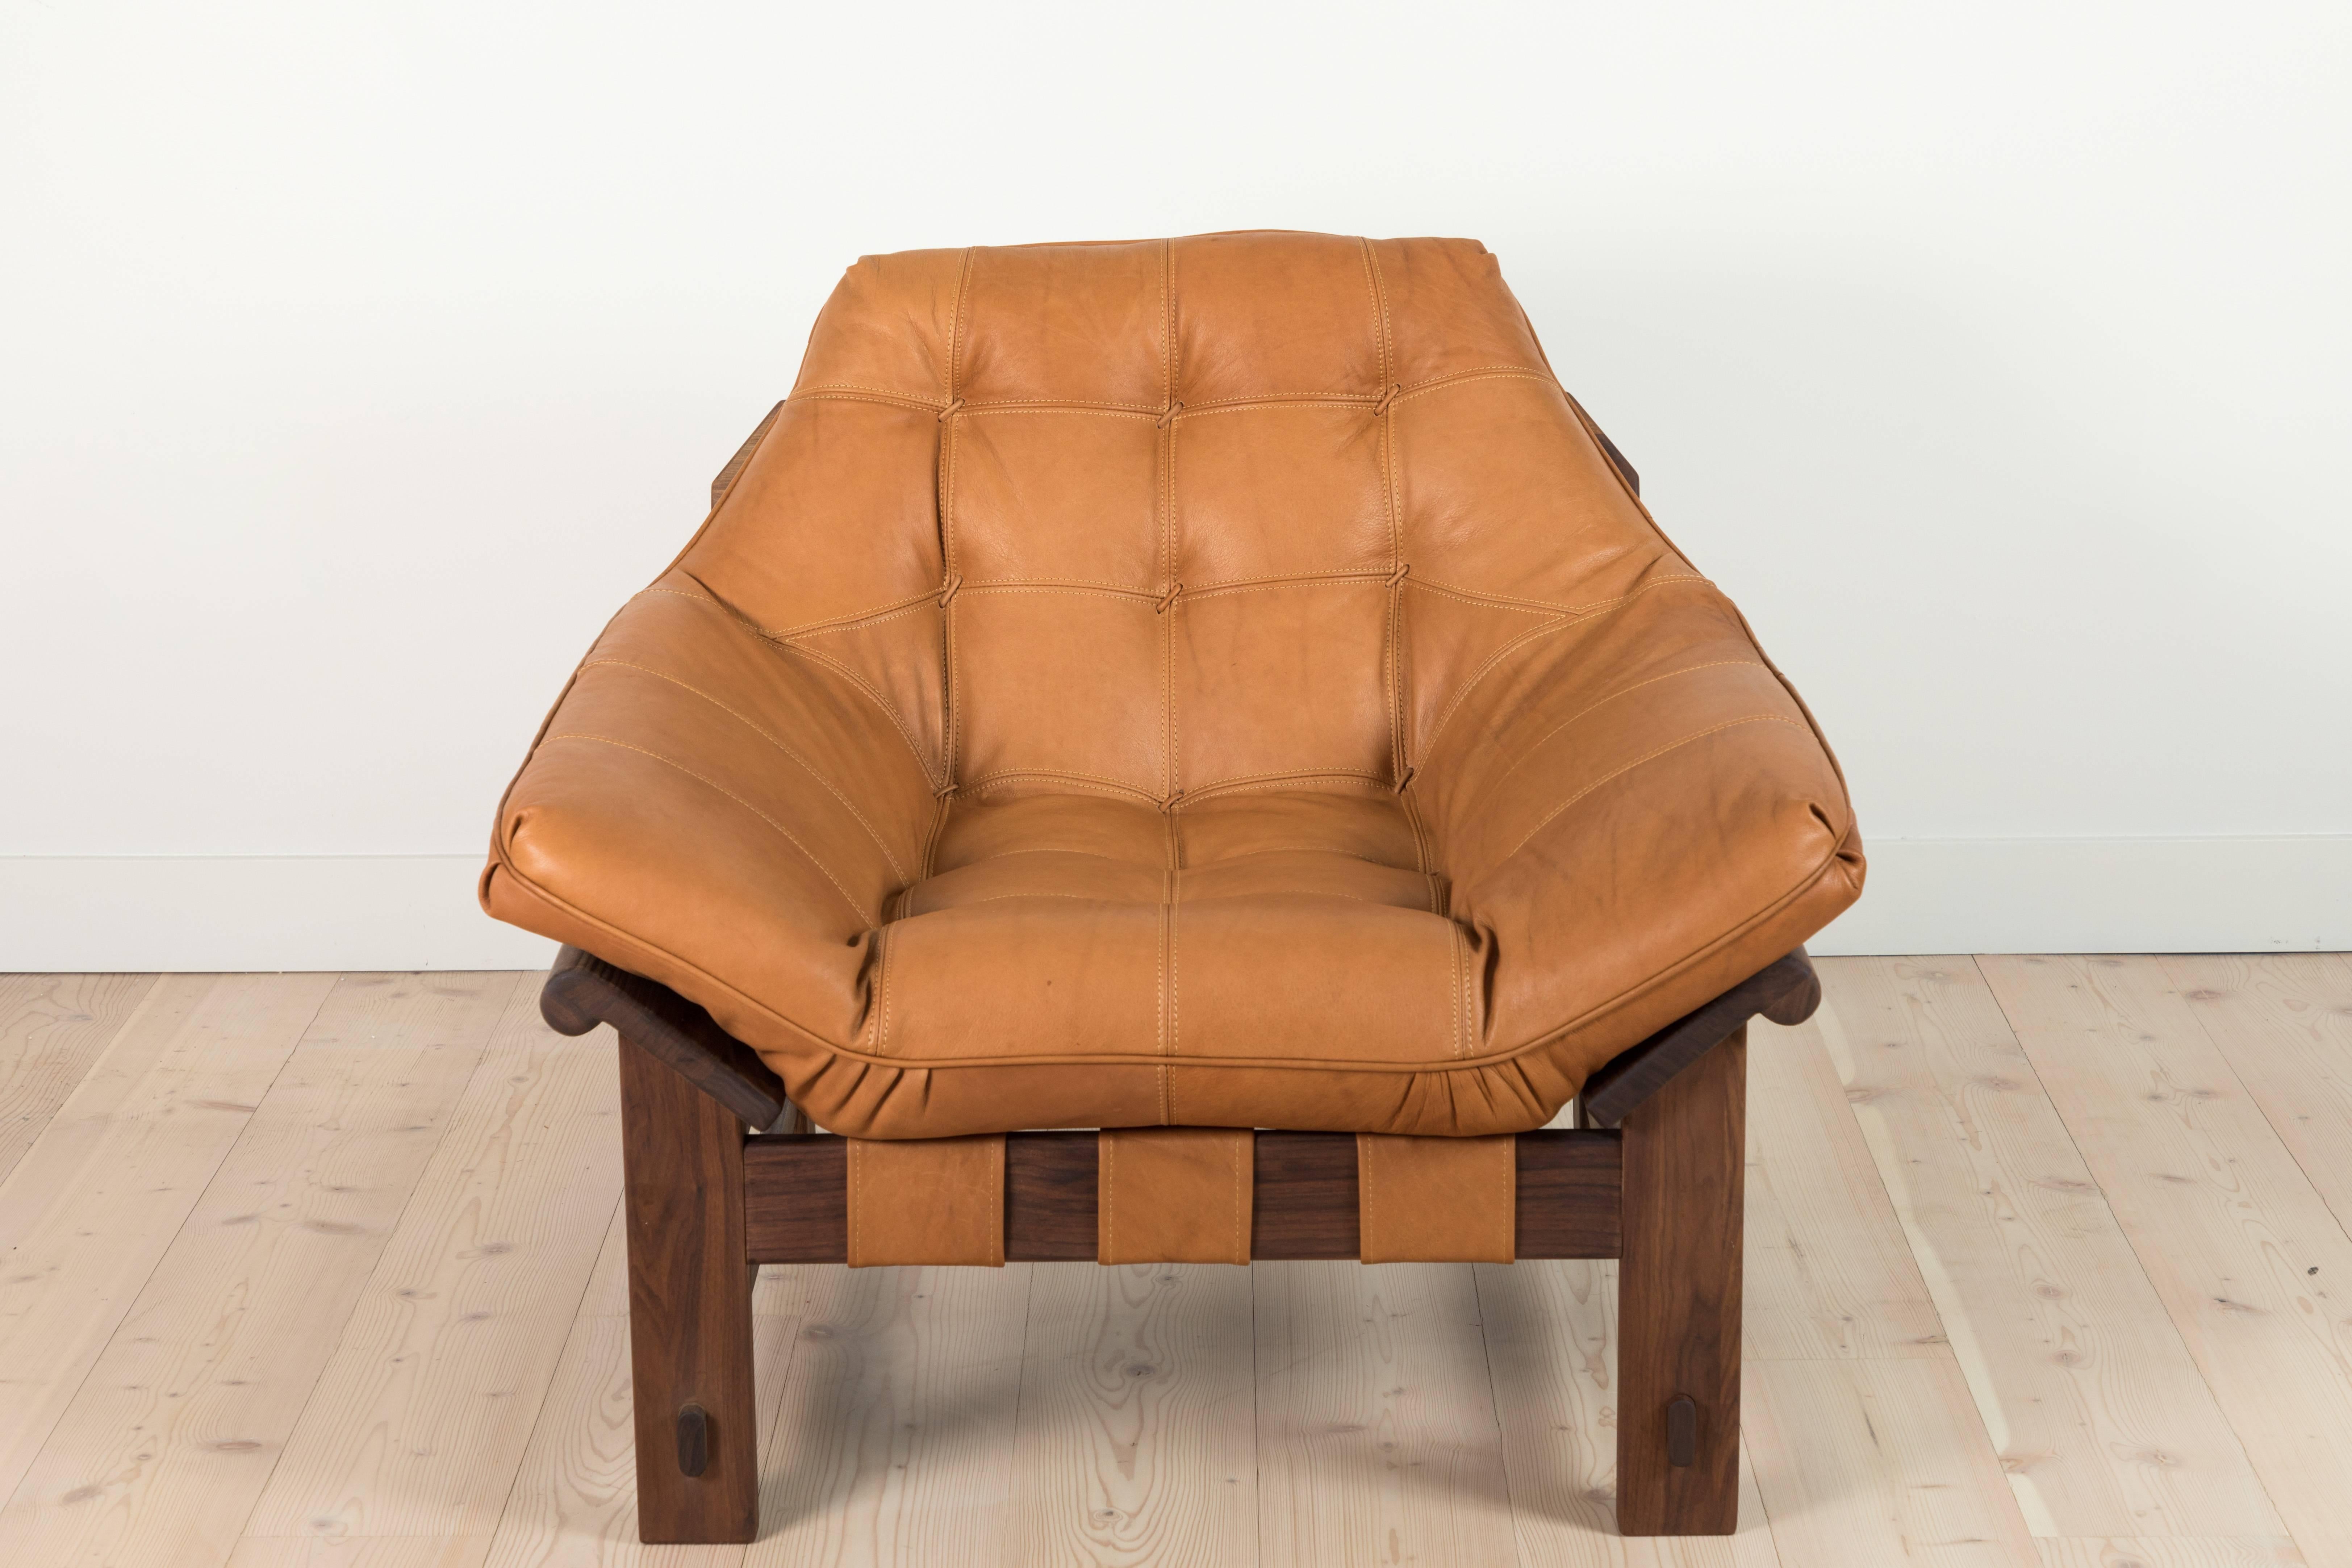 American Pair of Leather and Oiled Walnut Ojai Lounge Chairs by Lawson-Fenning